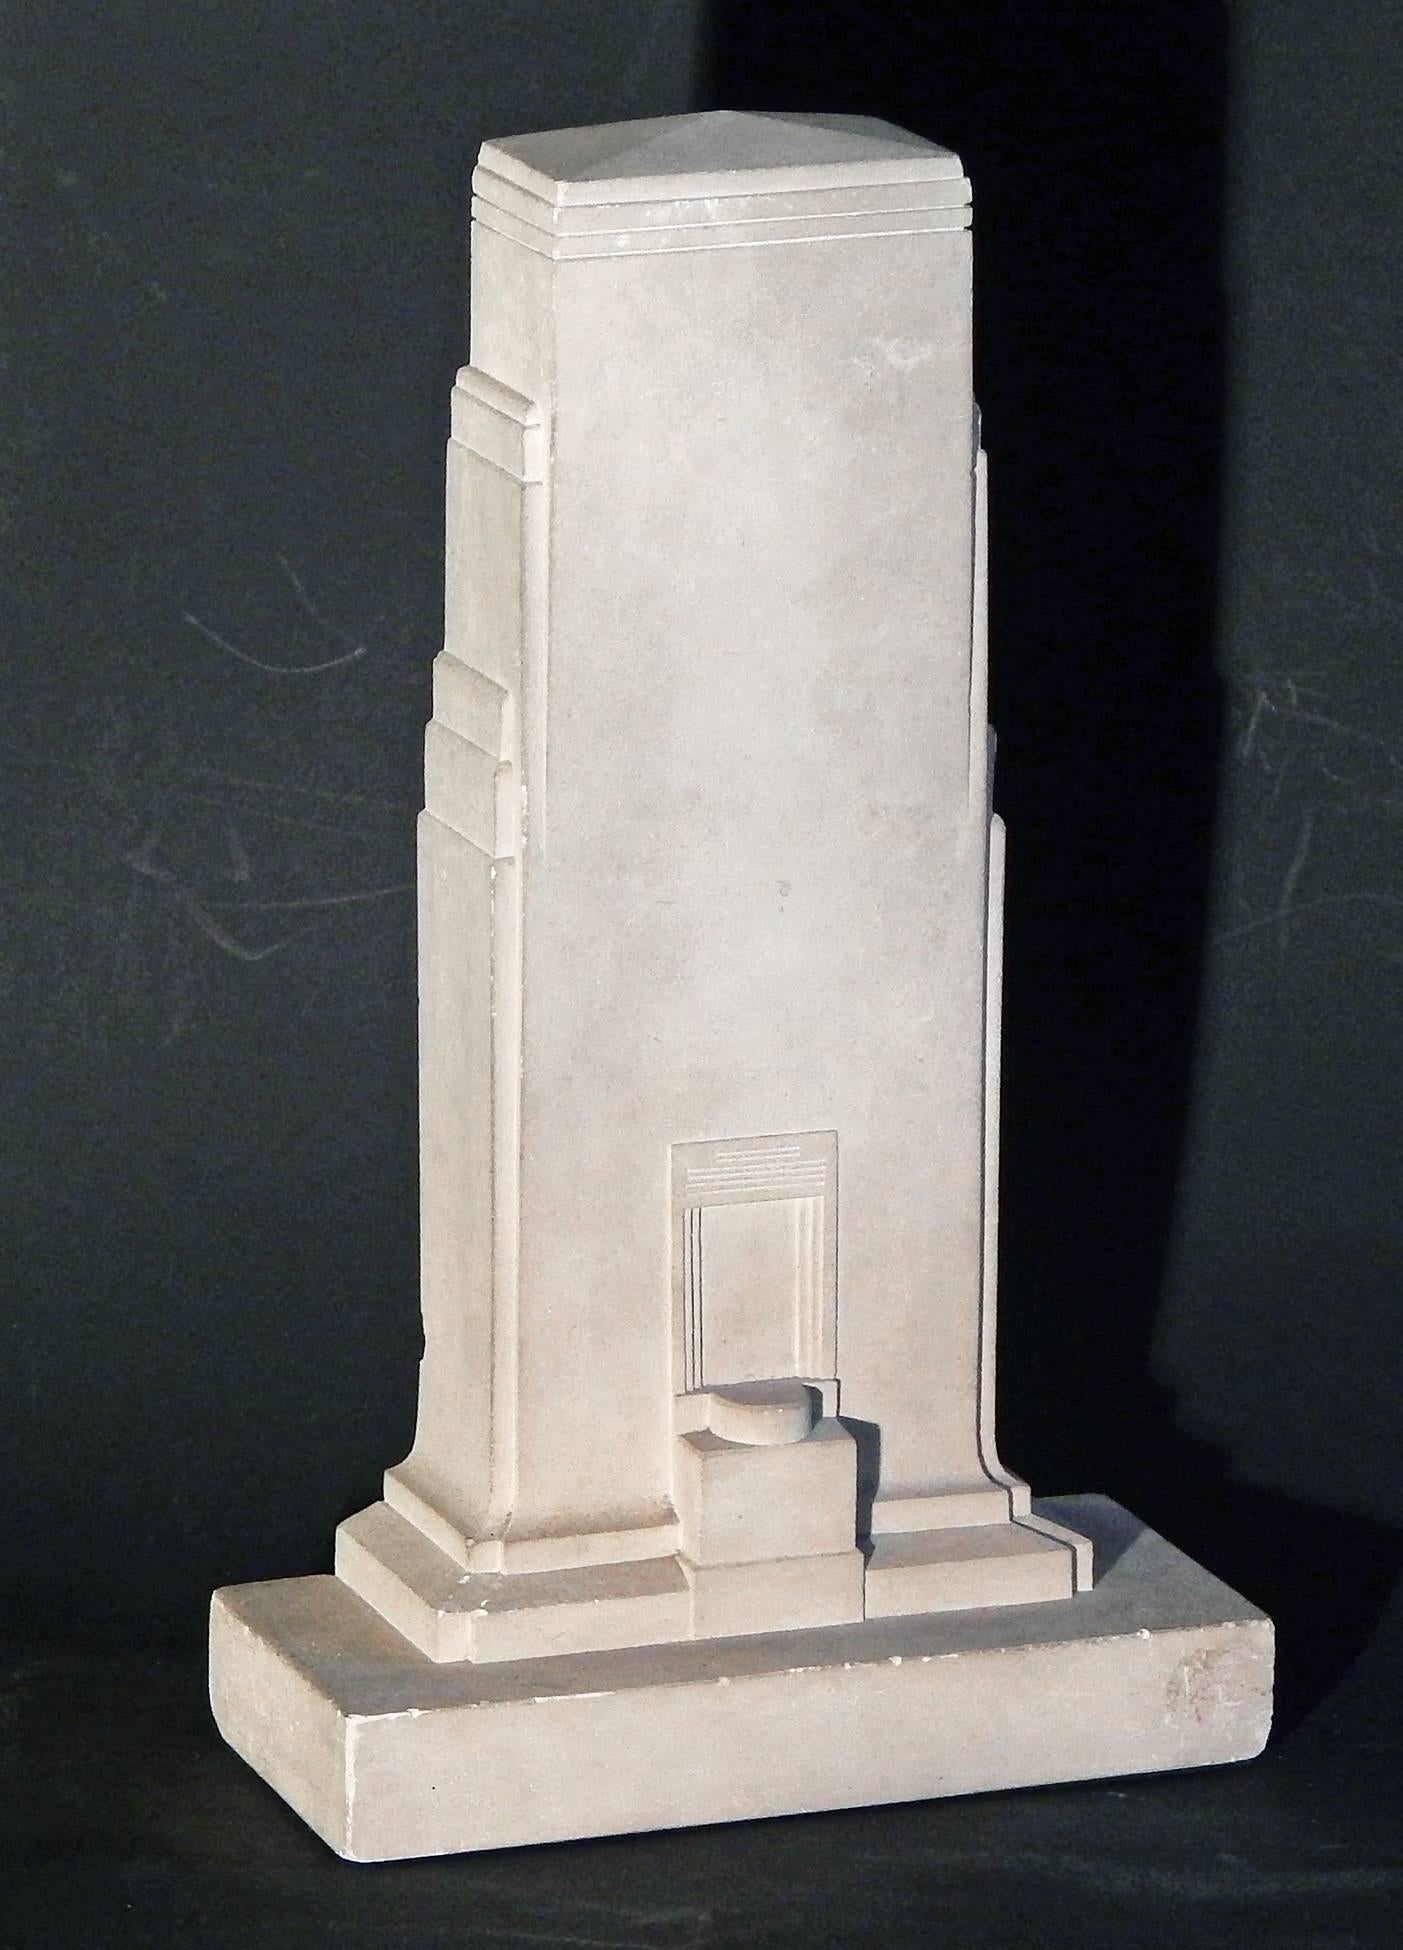 Remarkable and unique, this garniture set of three carved limestone pieces -- a centerpiece flanked by two candlesticks, is a stunning example of high style Art Deco sculpture. The centerpiece is clearly inspired by Art Deco skyscrapers and